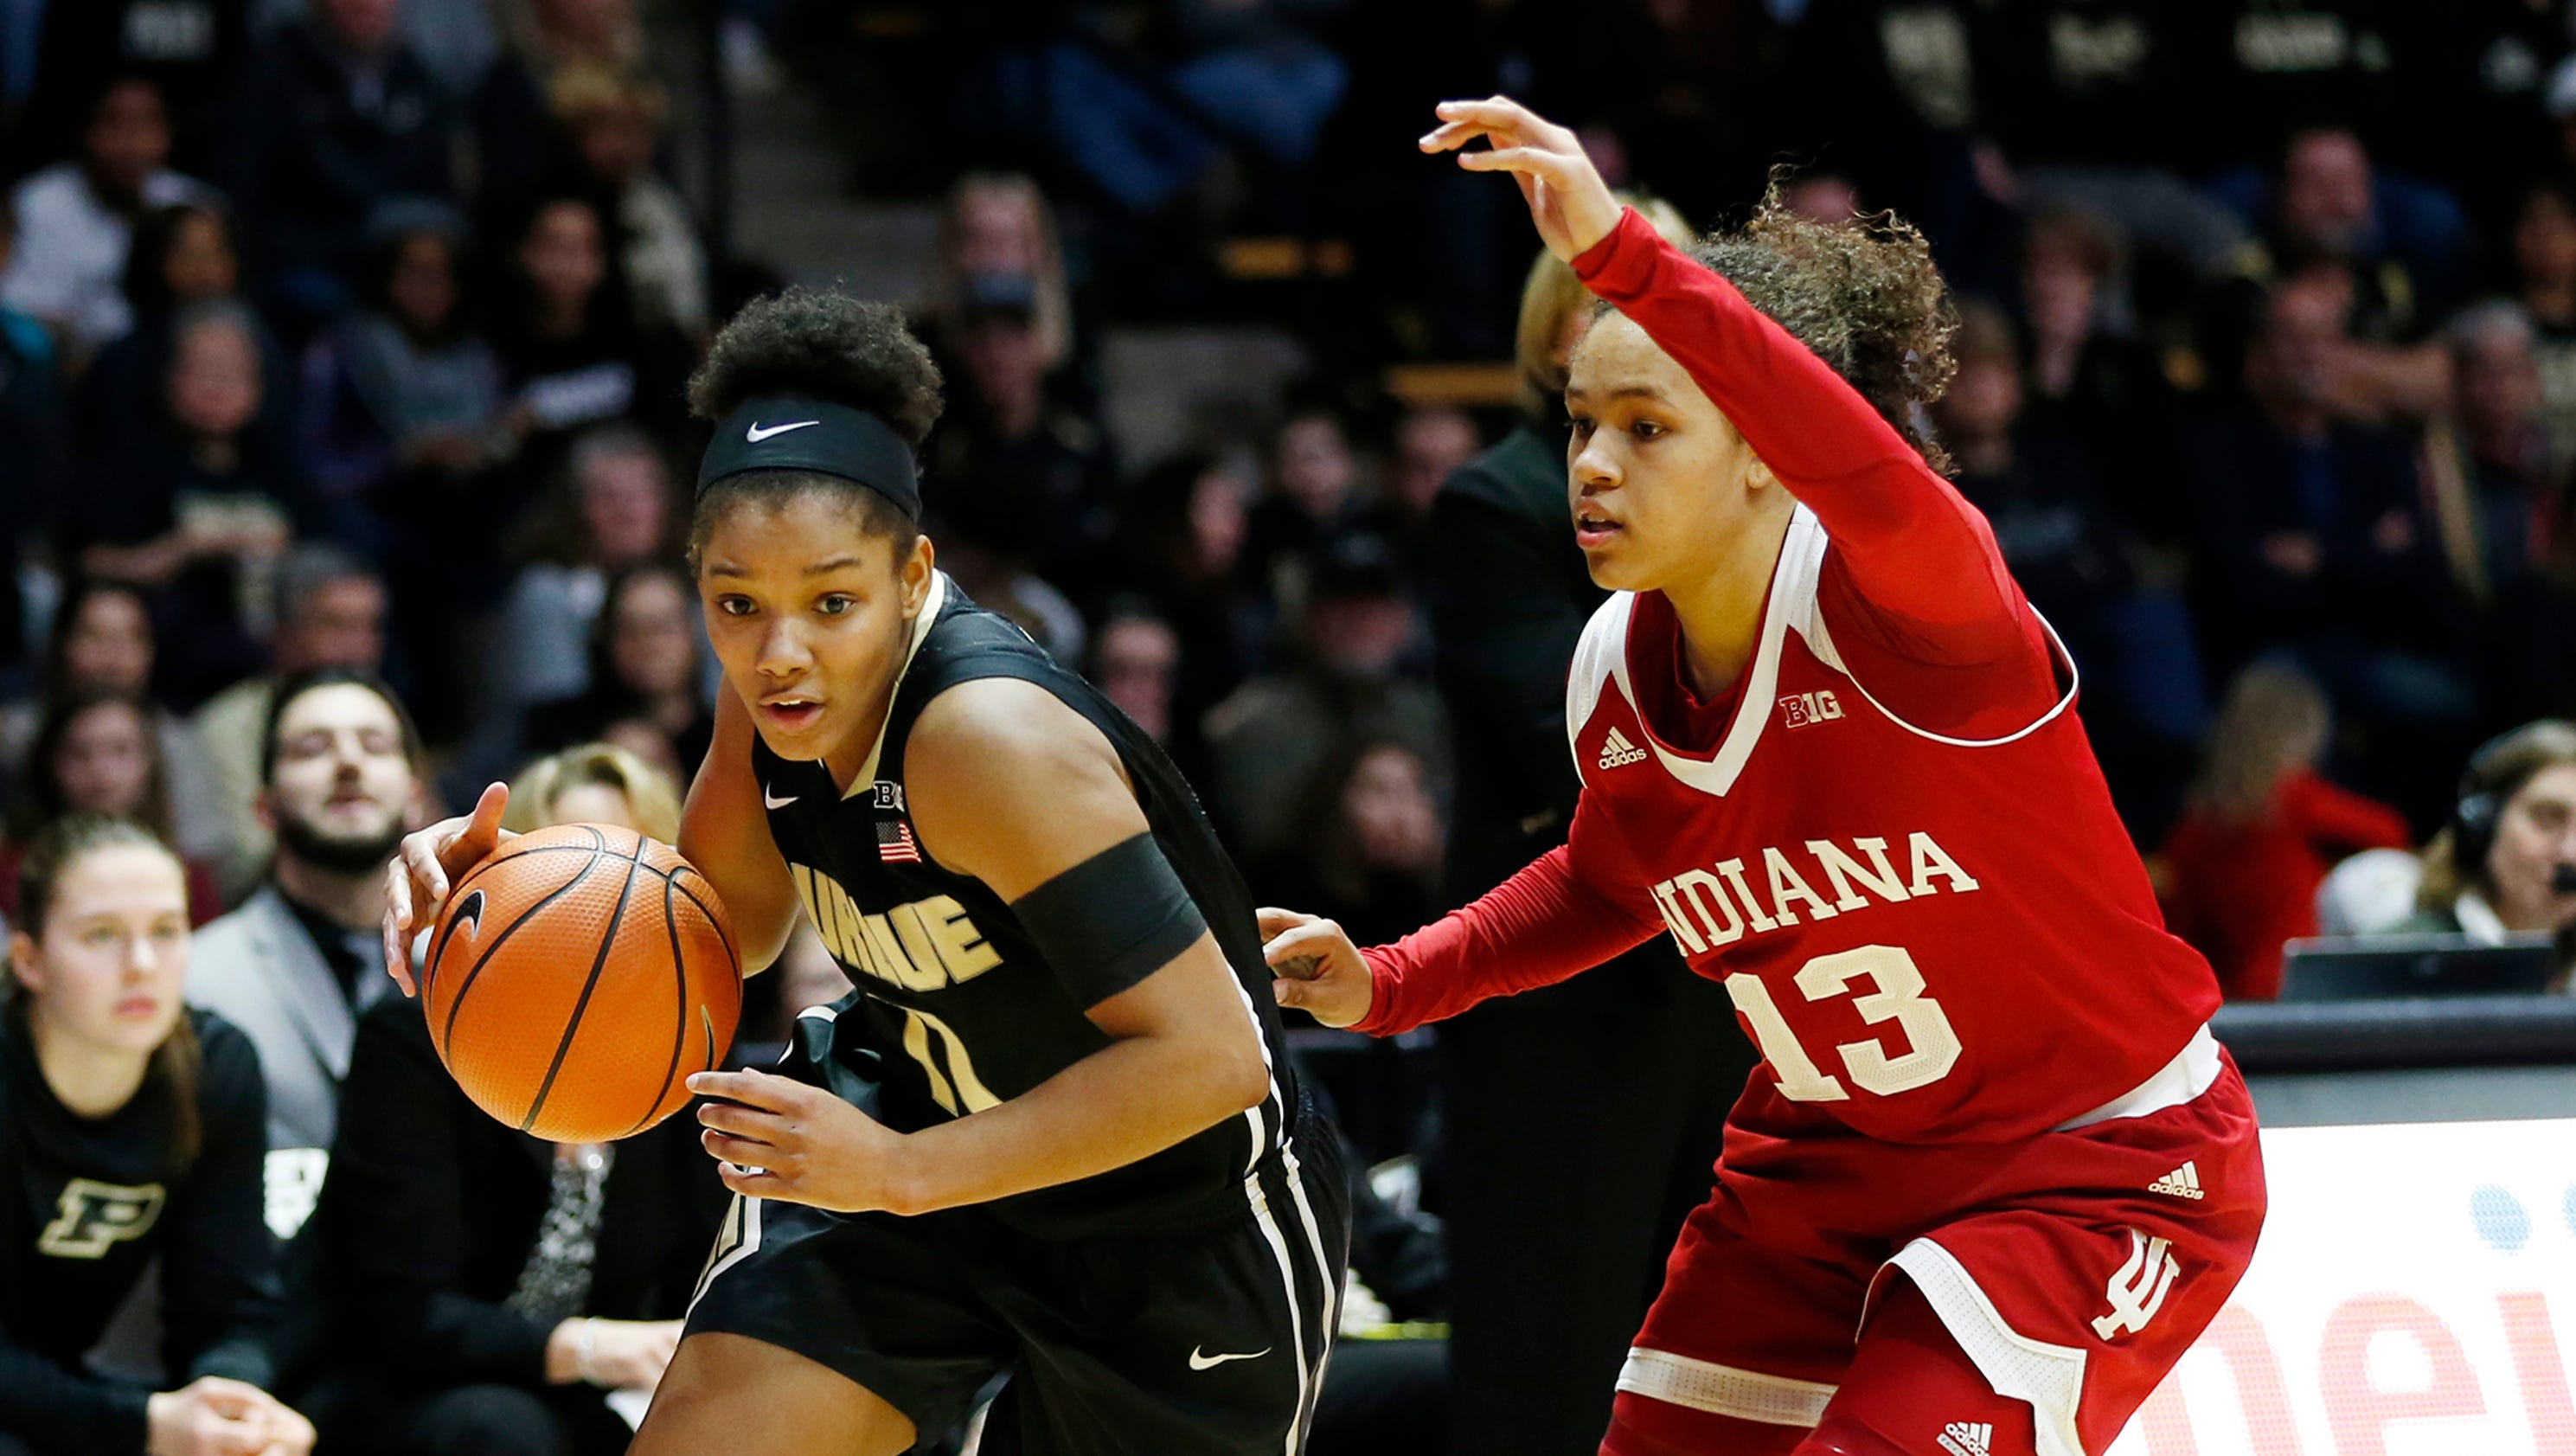 WNIT Scouting Purdue women's basketball at Indiana